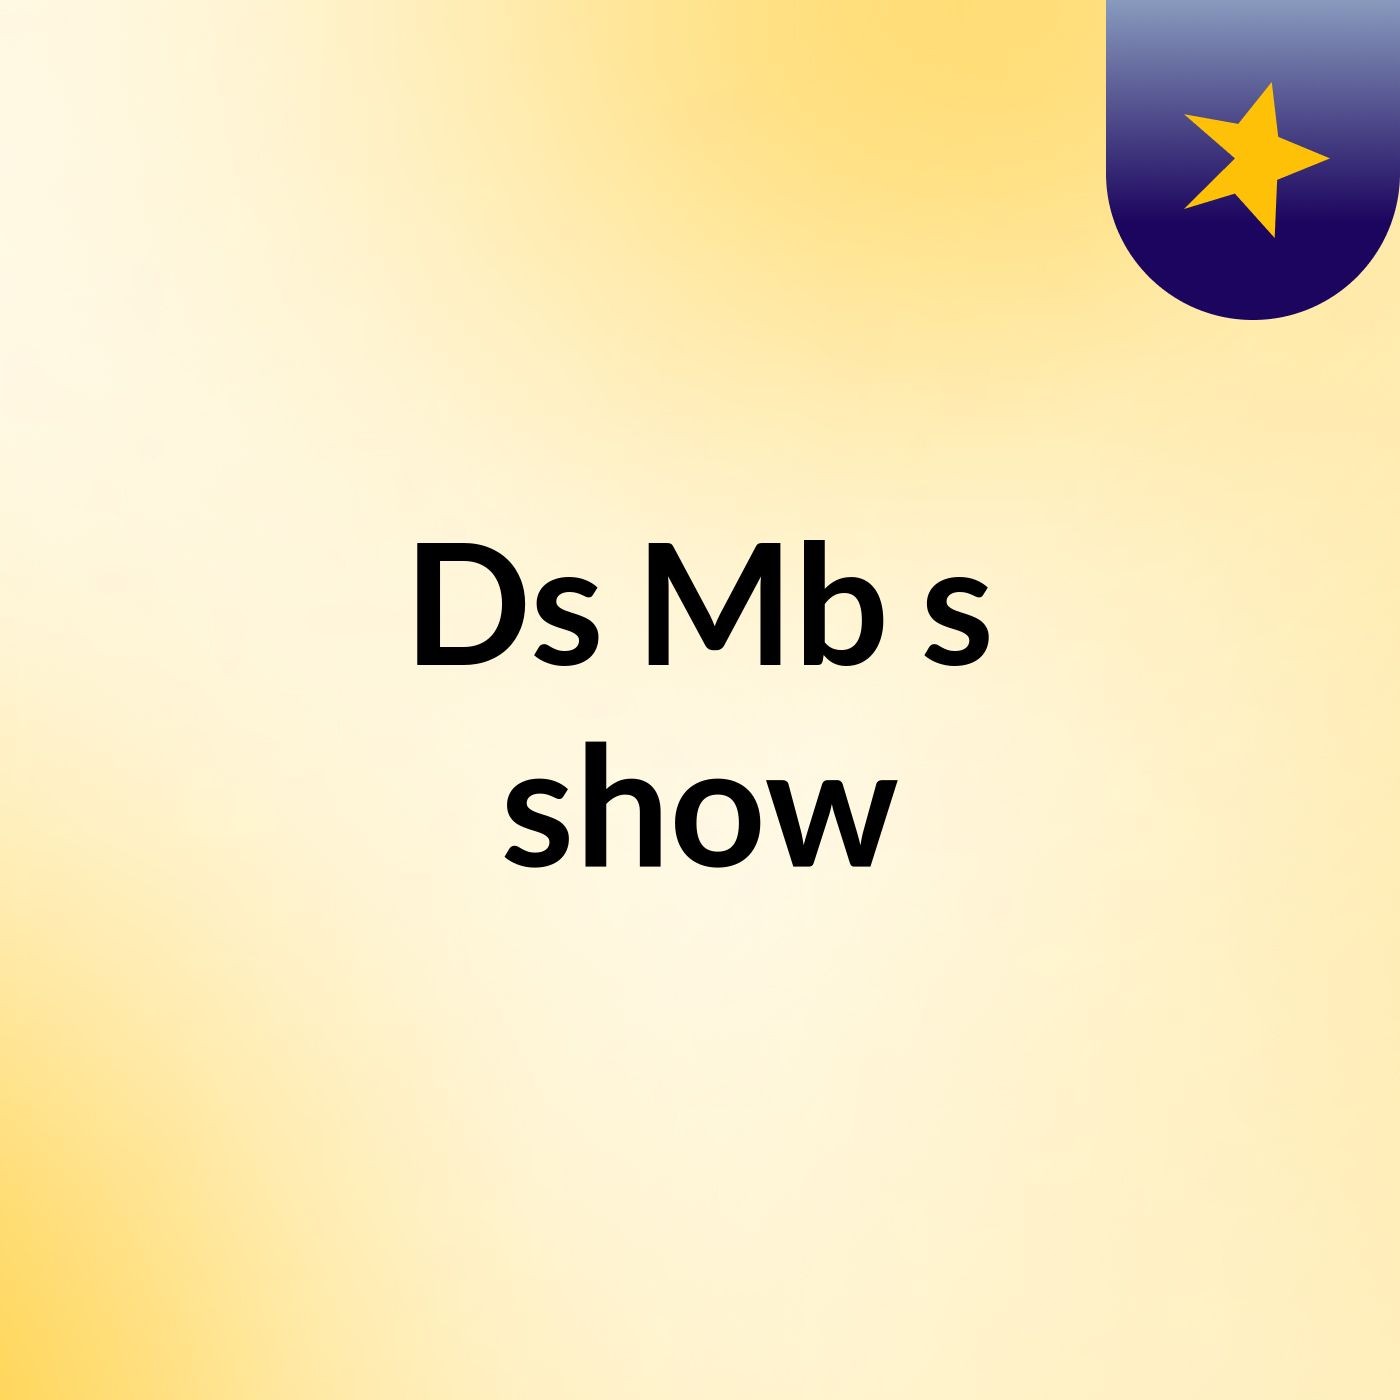 Ds Mb's show